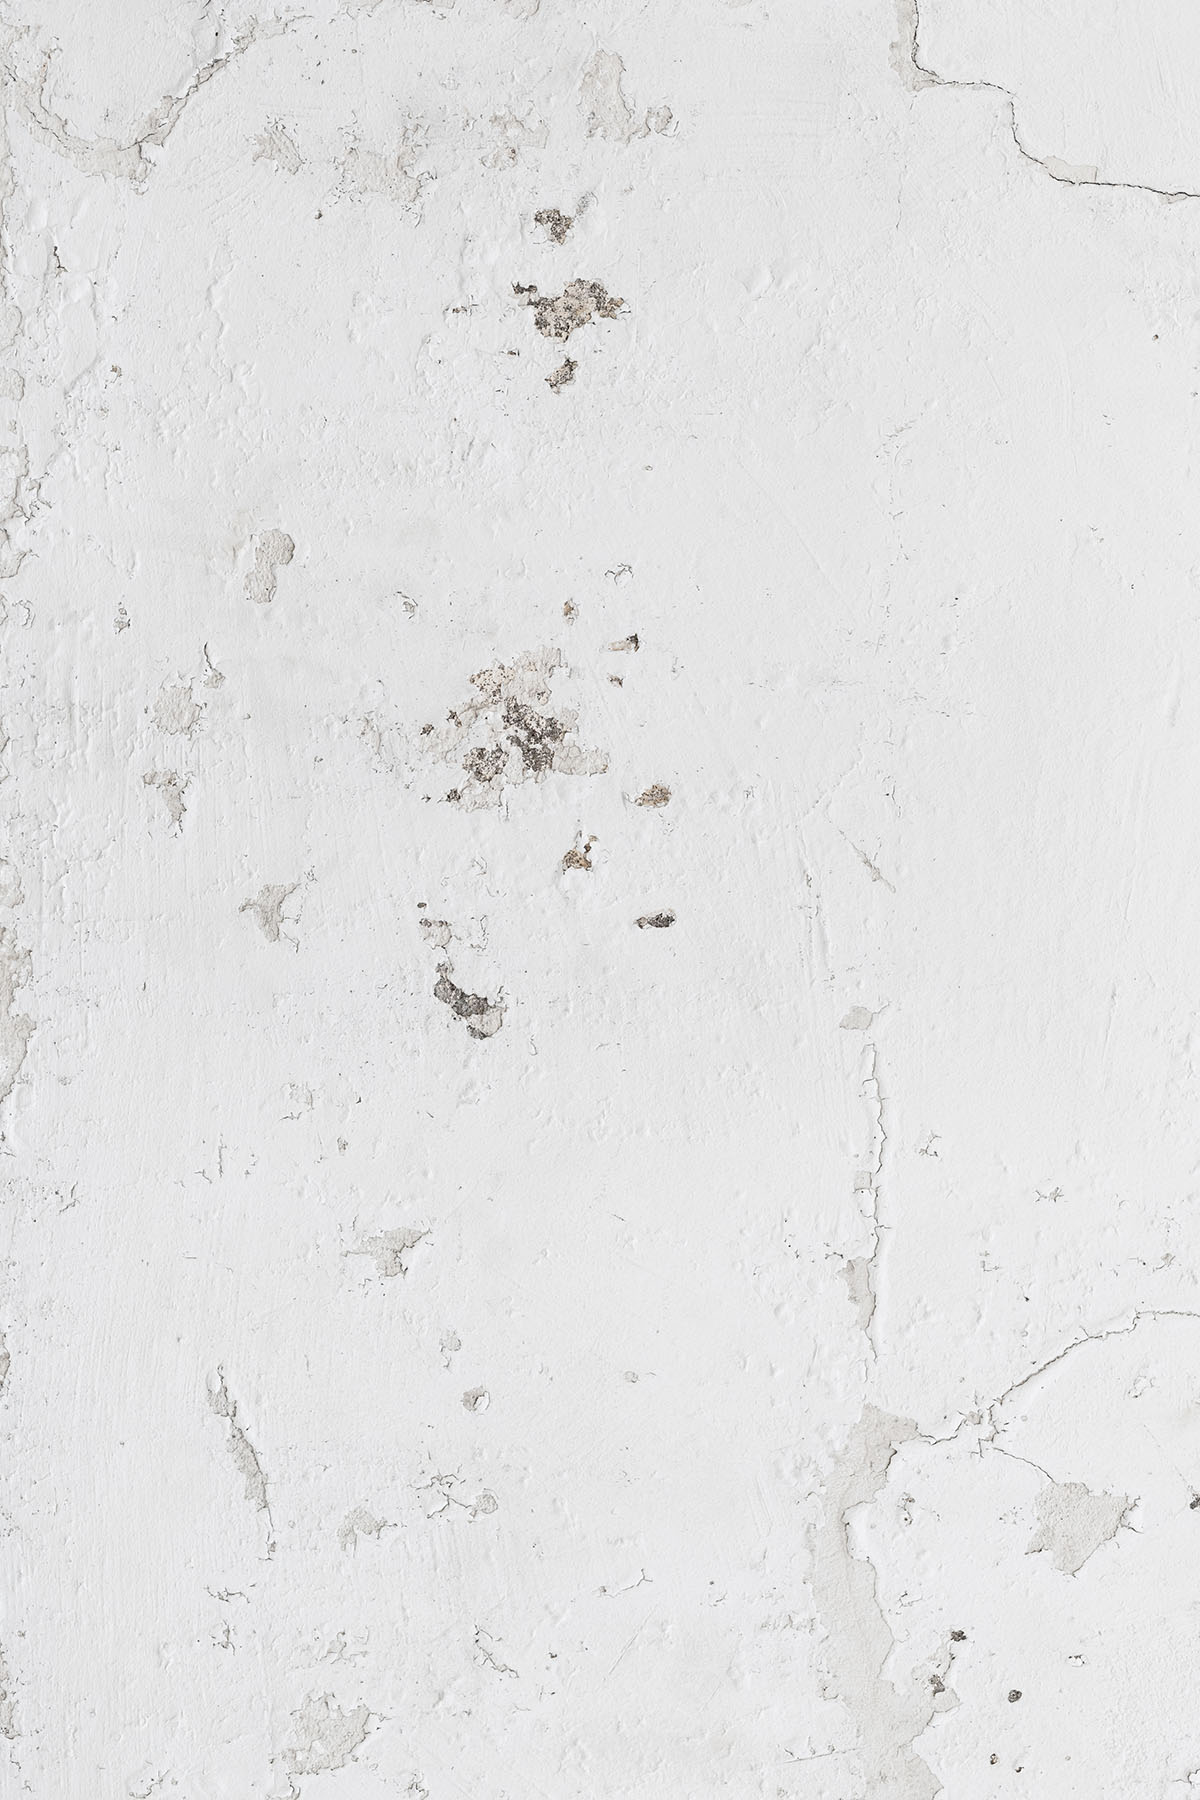 White ‘cracked wall’ photo backdrop printed on high quality vinyl